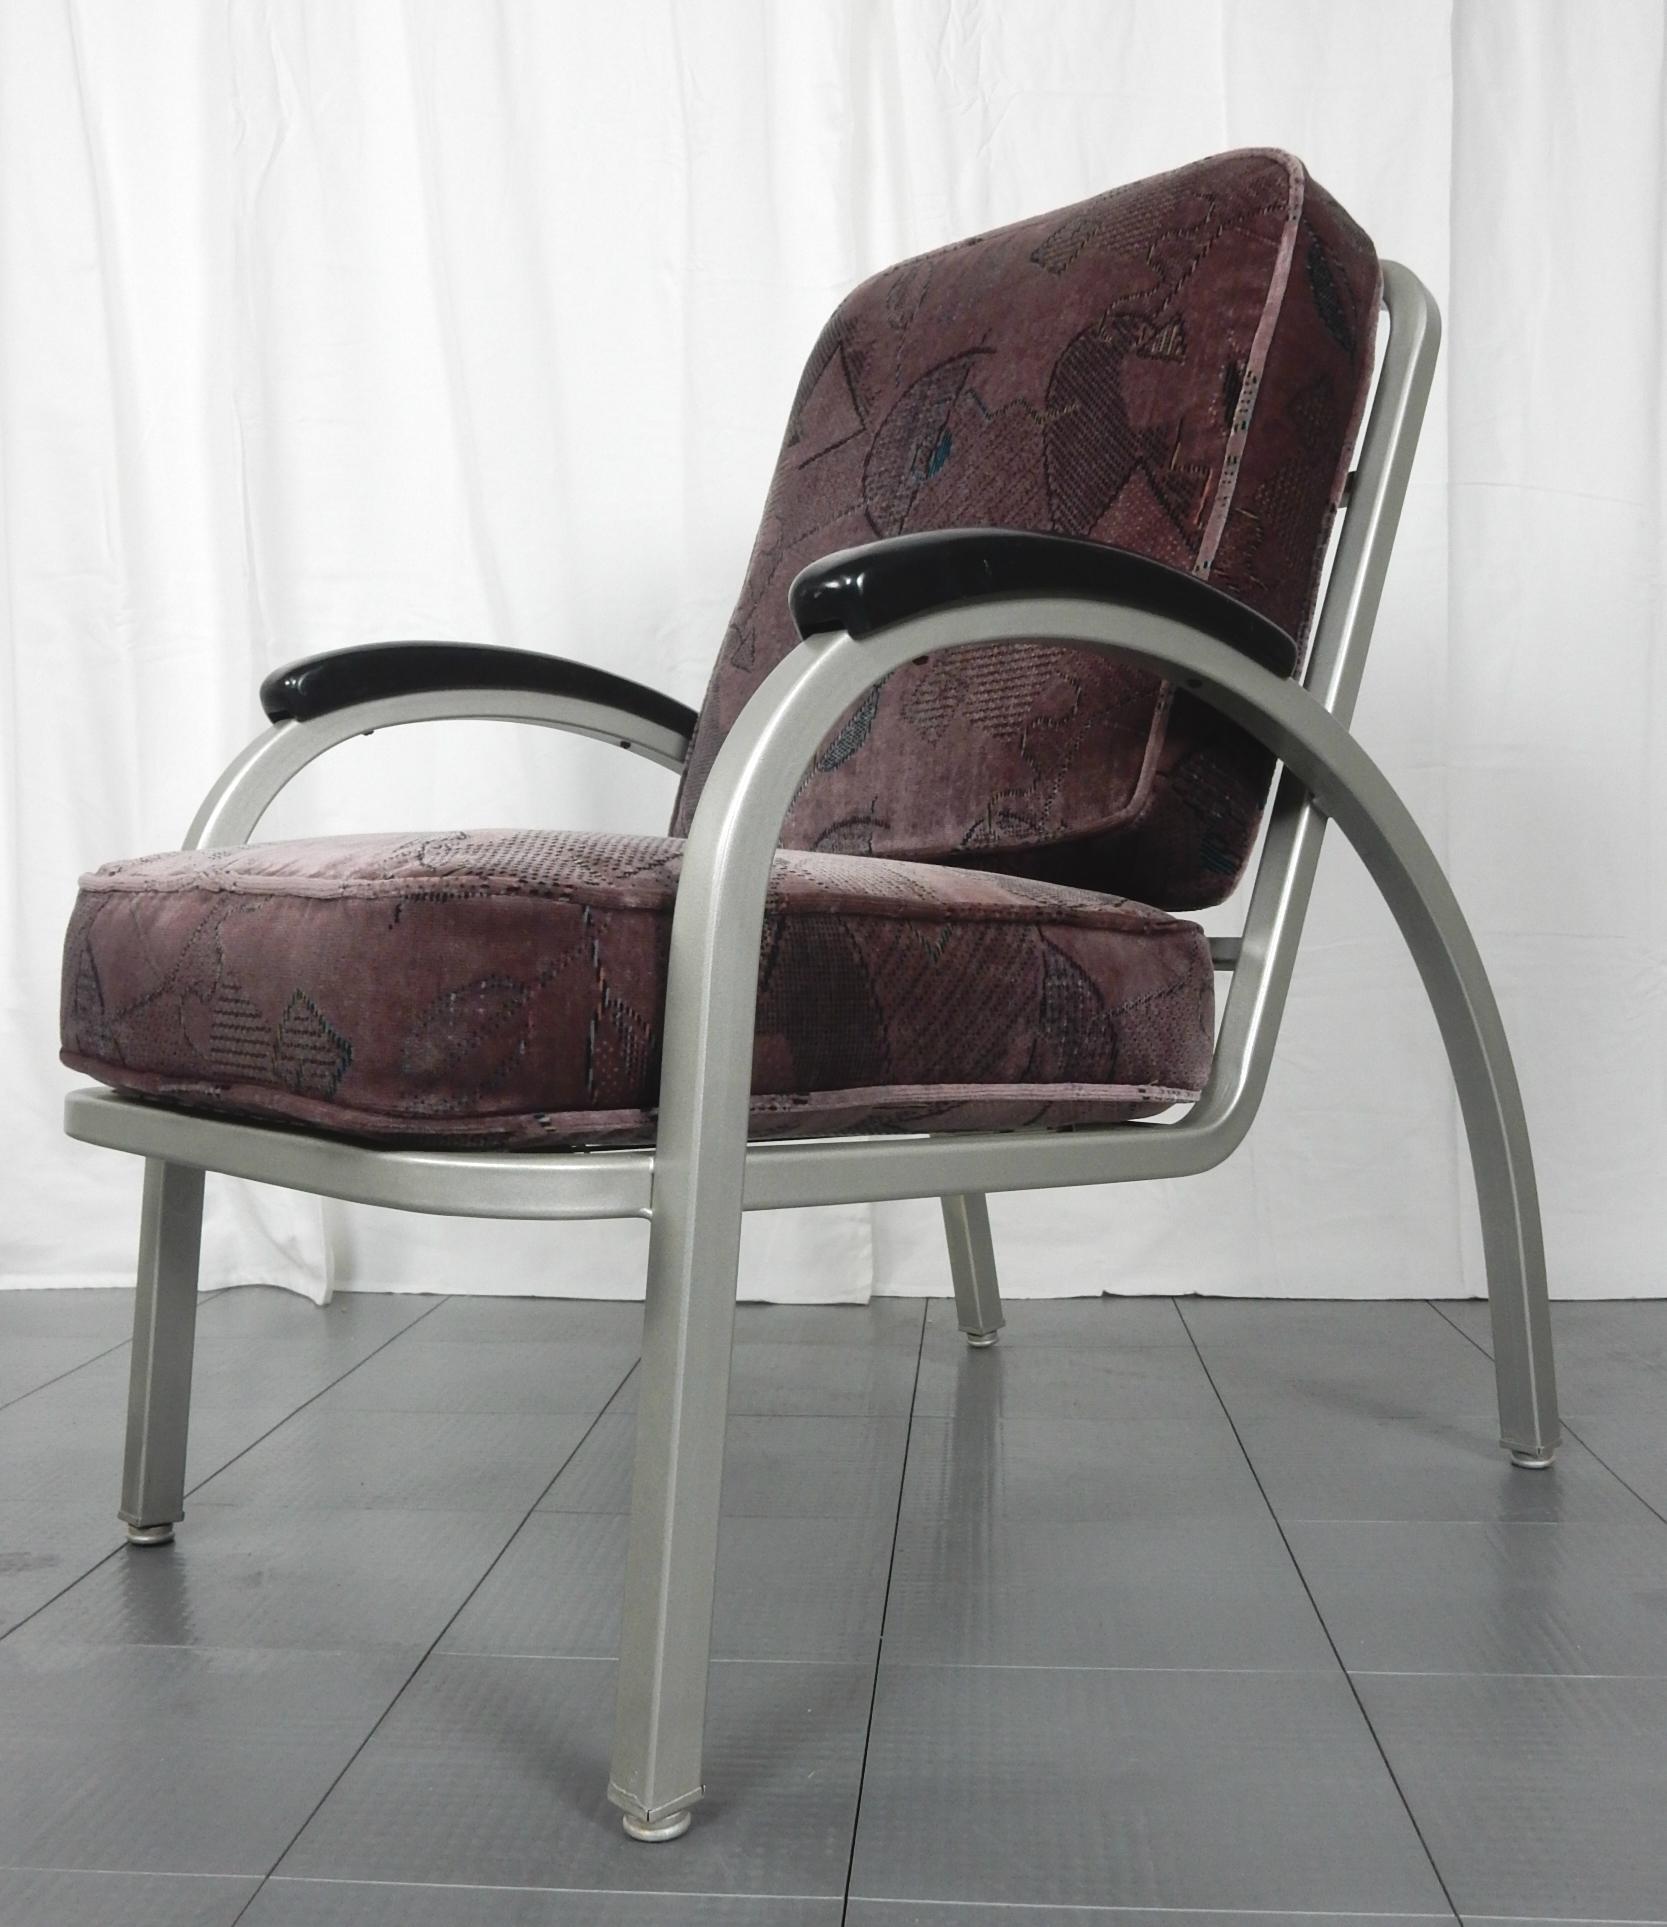 Streamline Art Deco Lounge Chairs Designed by Norman Bel Geddes In Good Condition For Sale In Las Vegas, NV